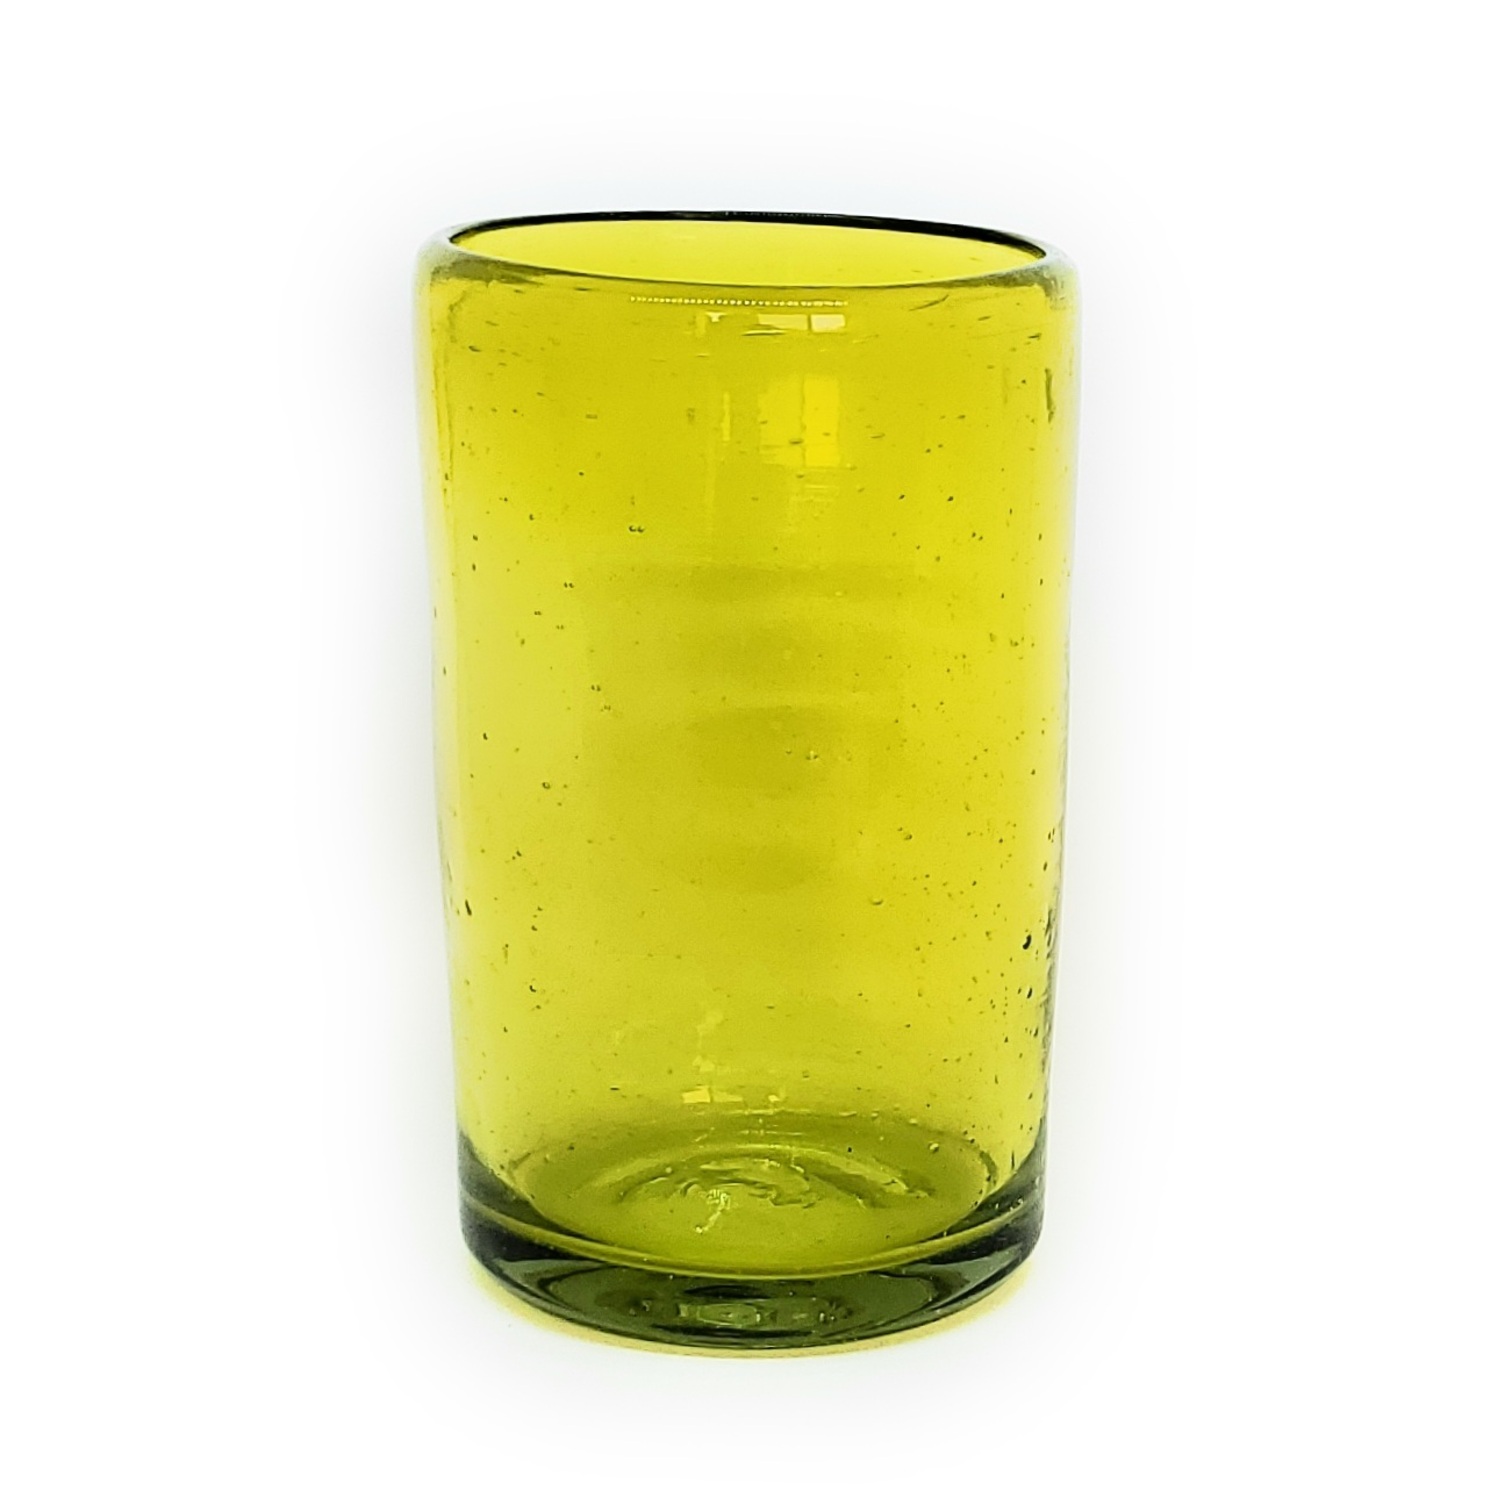 Sale Items / Solid Yellow 14 oz Drinking Glasses (set of 6) / These handcrafted glasses deliver a classic touch to your favorite drink.